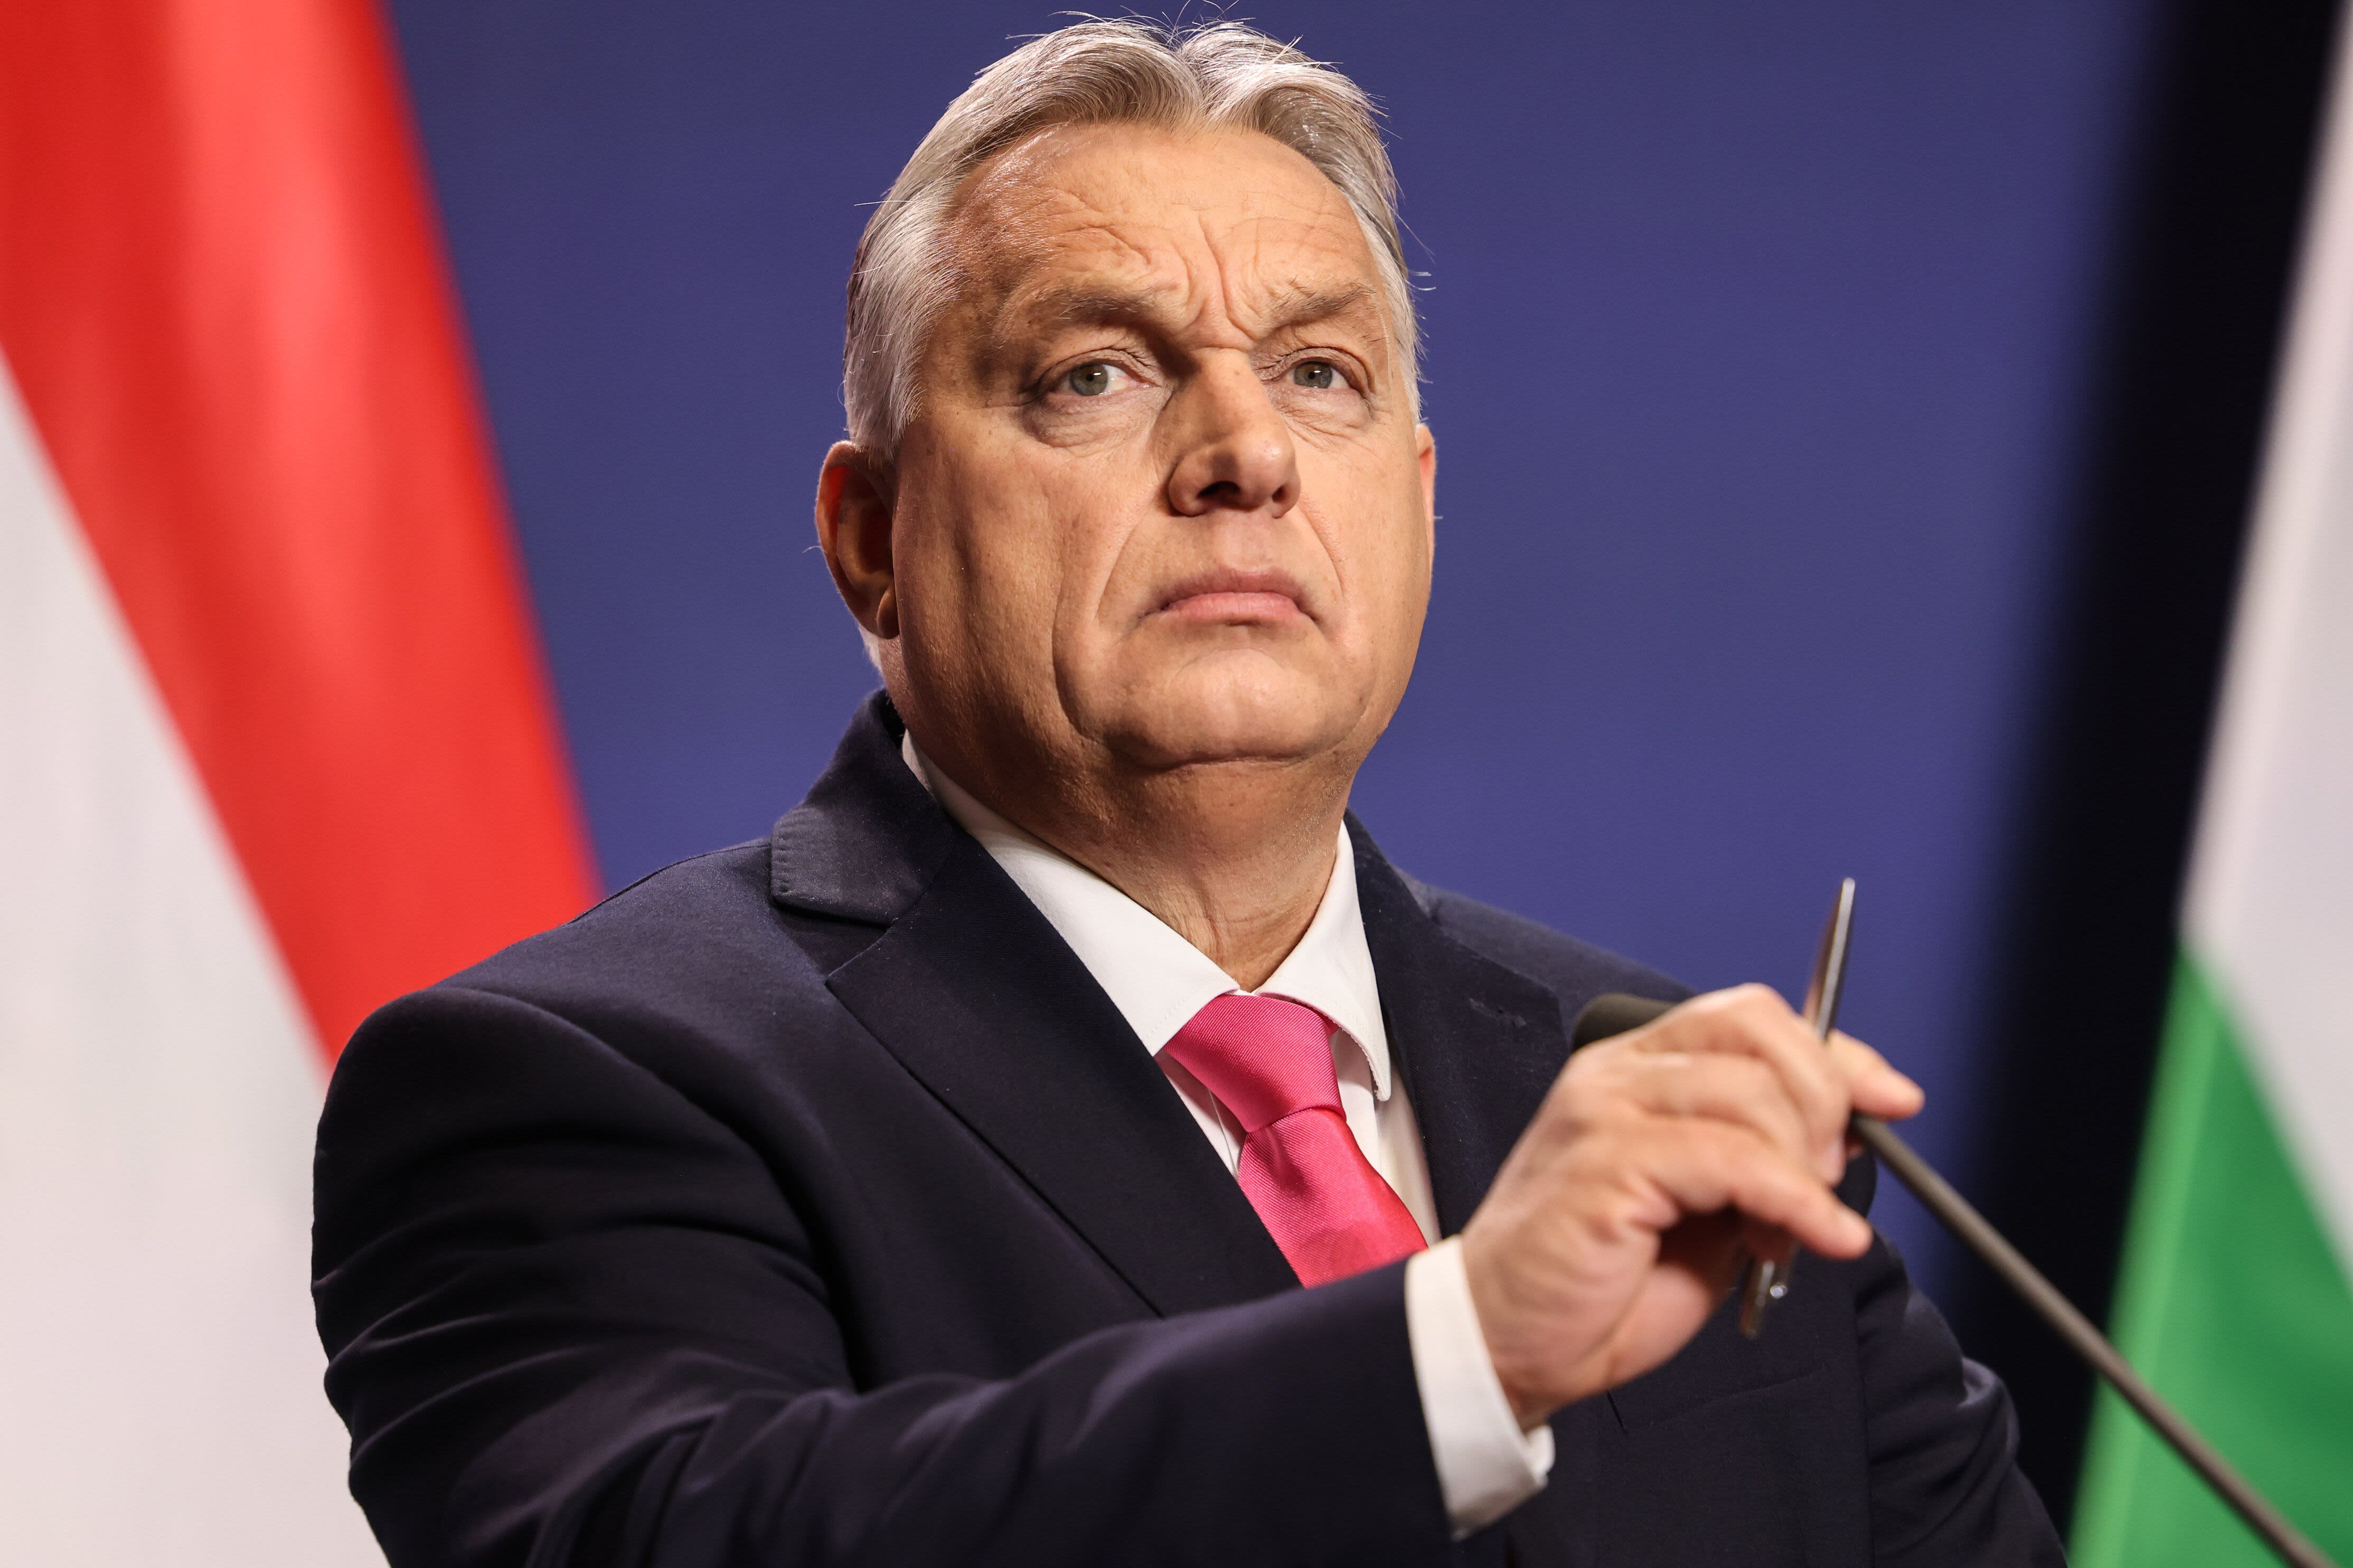 As Fico Fights For Life, Orban Frets Over Fate of Key EU Ally